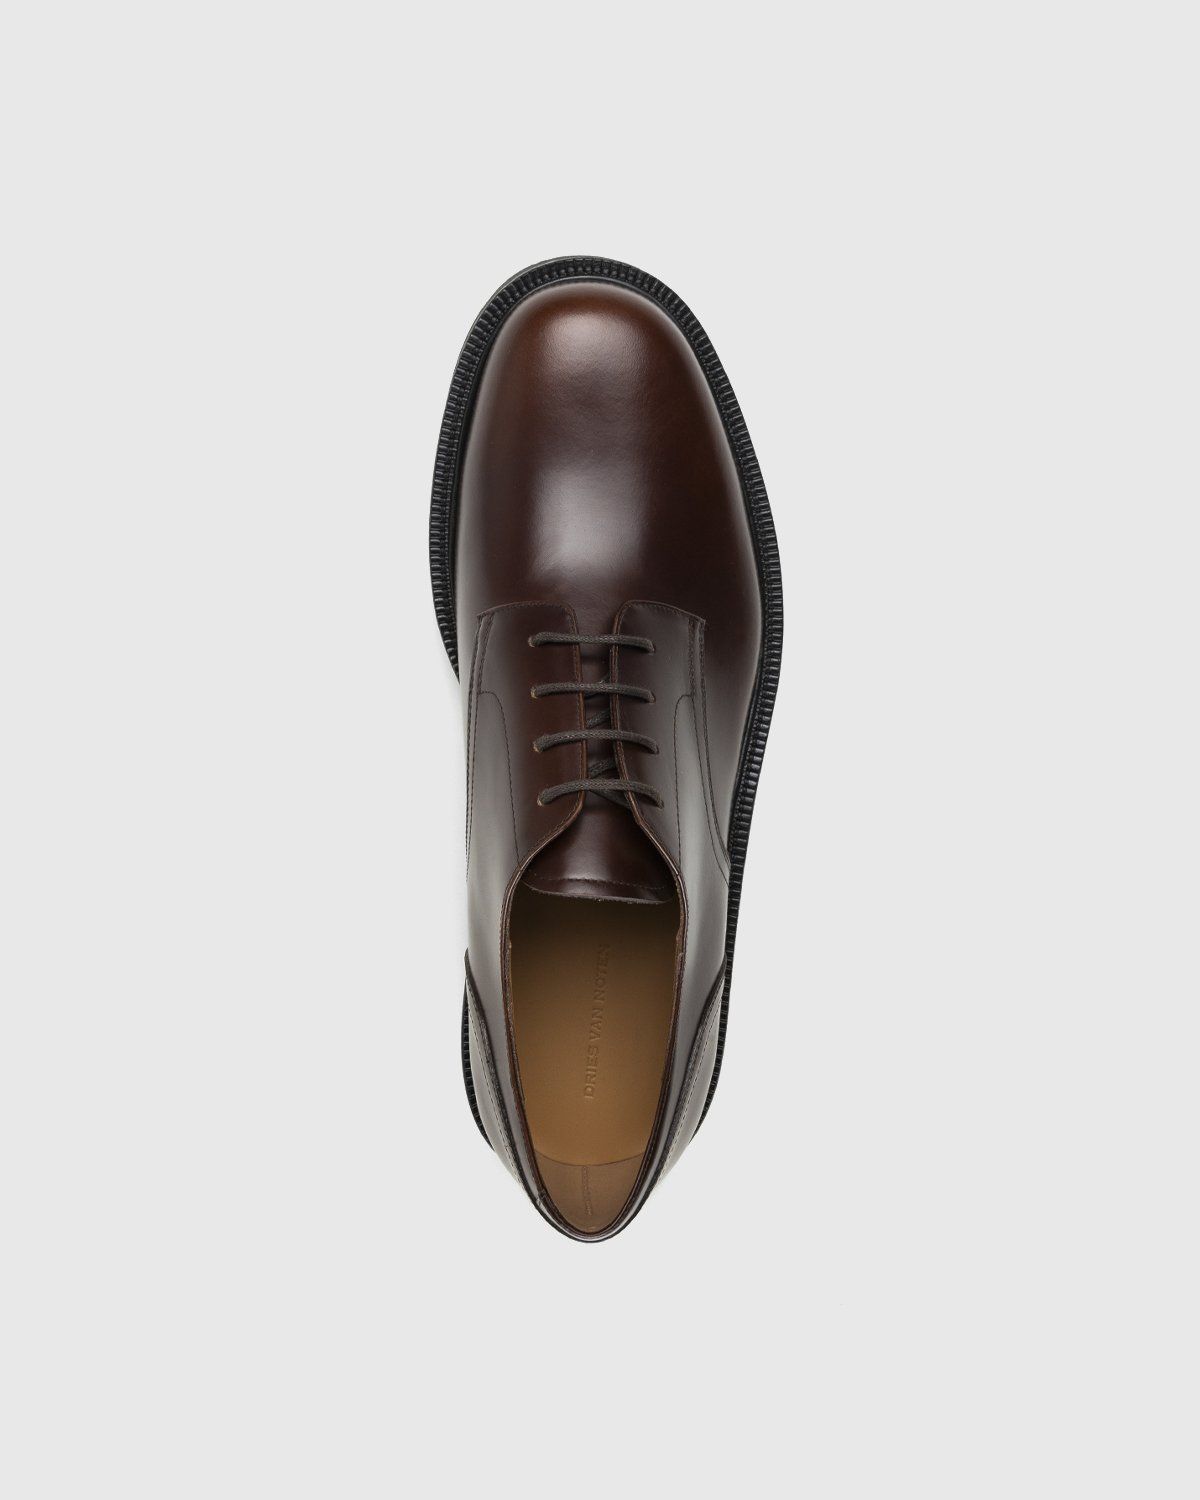 Dries Van Noten – Leather Lace-Up Derby Shoes Brown - Image 5